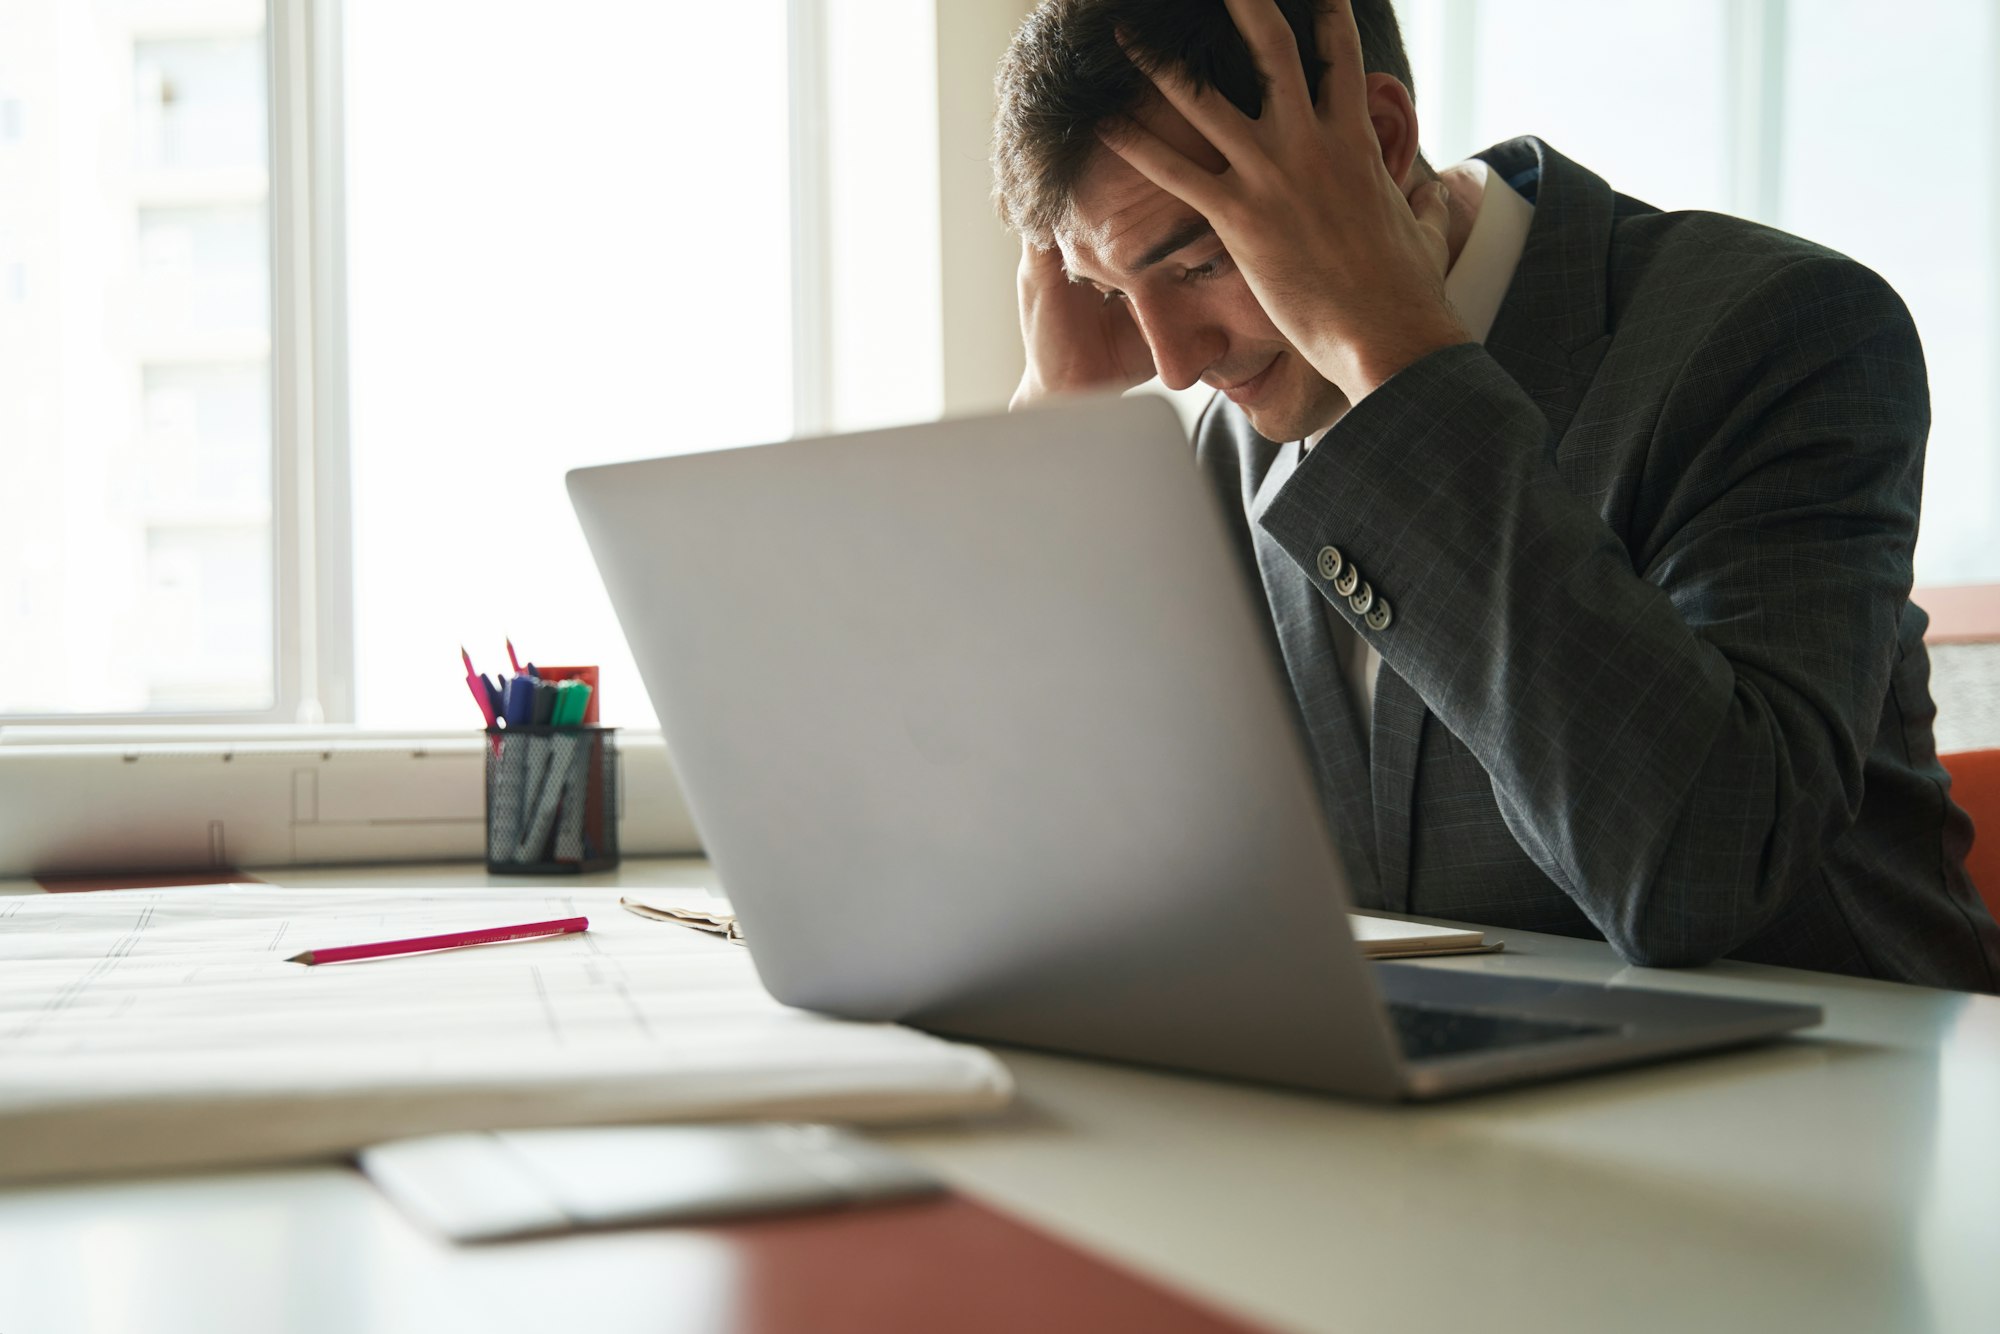 Stressed worker grabbing his head during work on laptop